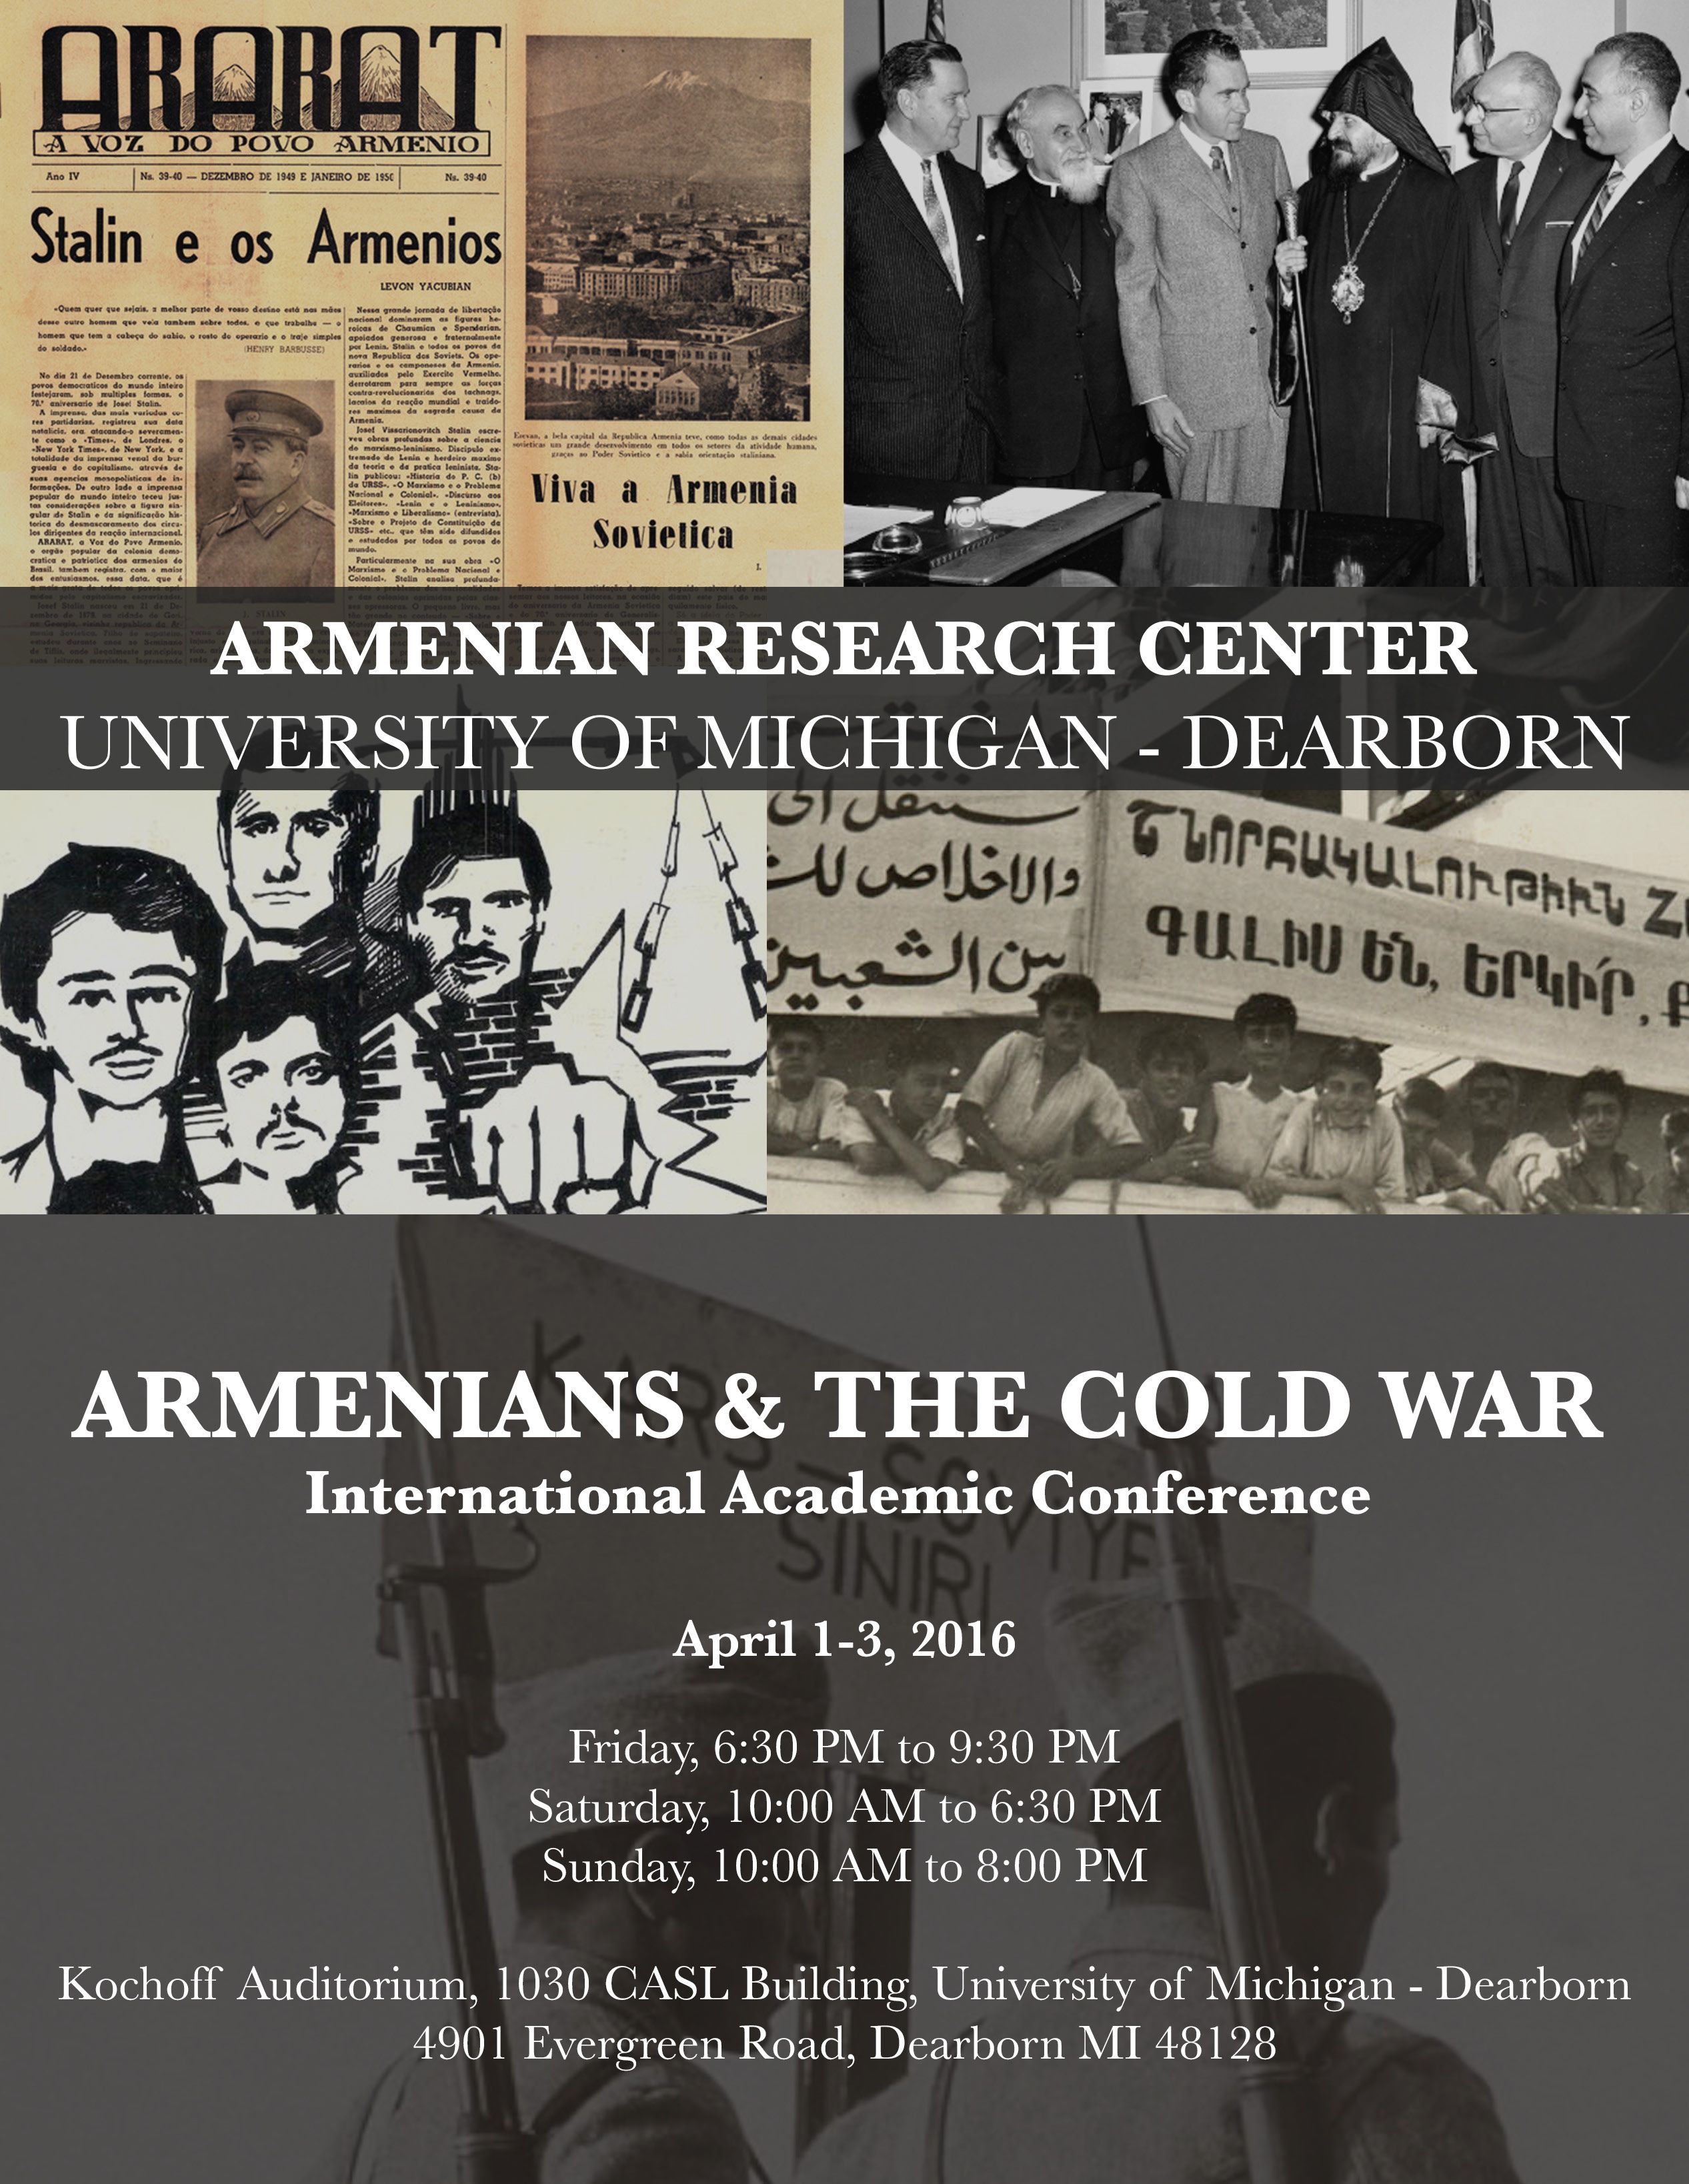 Book cover: Armenians & The Cold War, International Arademic Conference, April 1-3, 2016. Armenian Research Center, University of Michigan-Dearborn